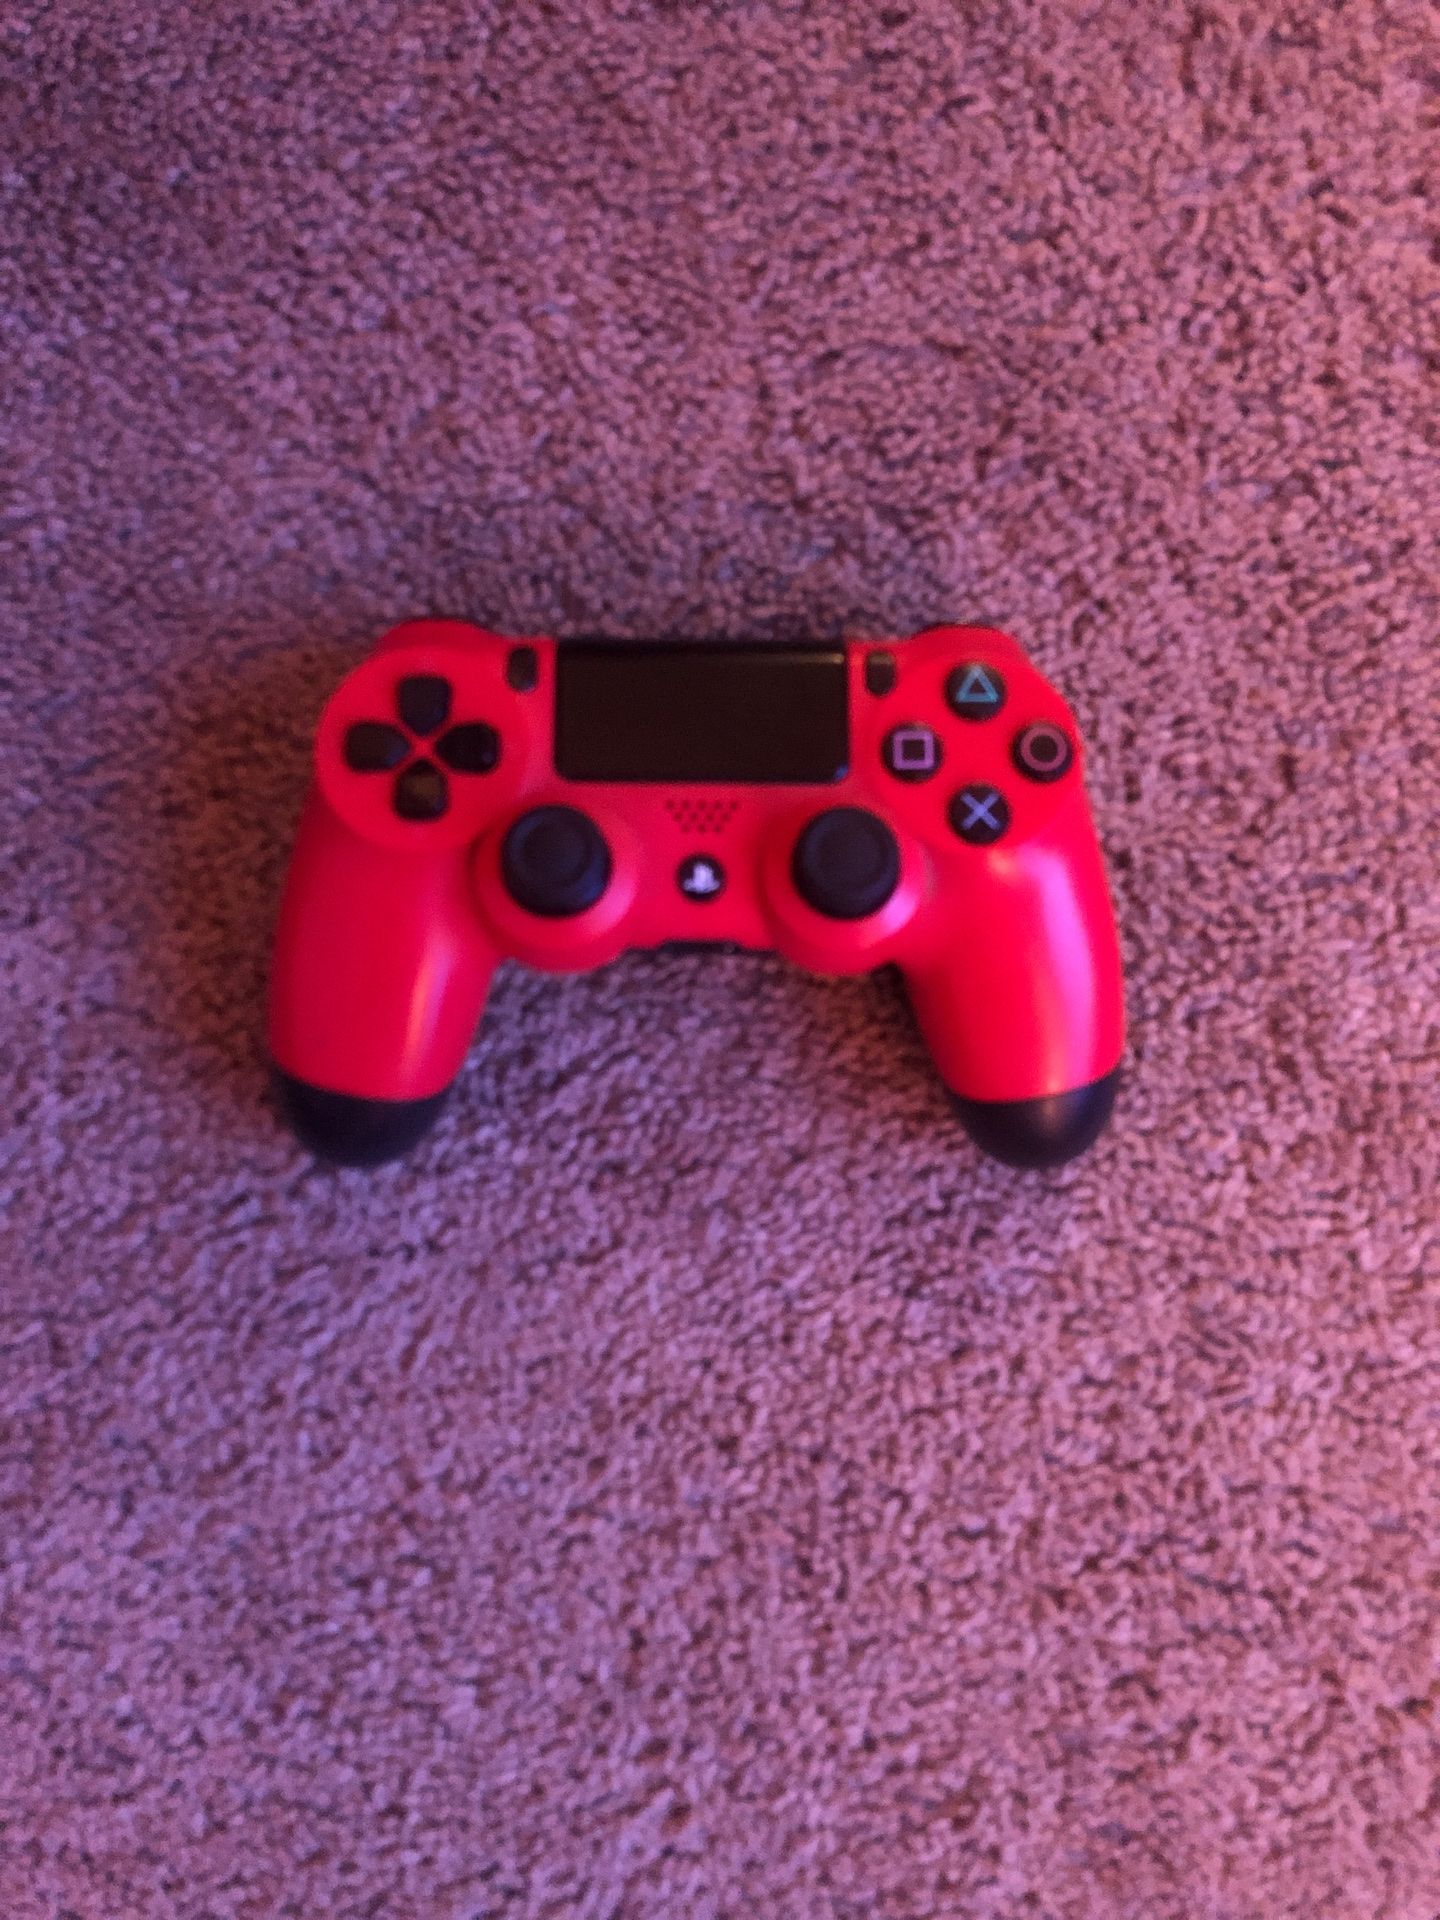 Red ps4 controller